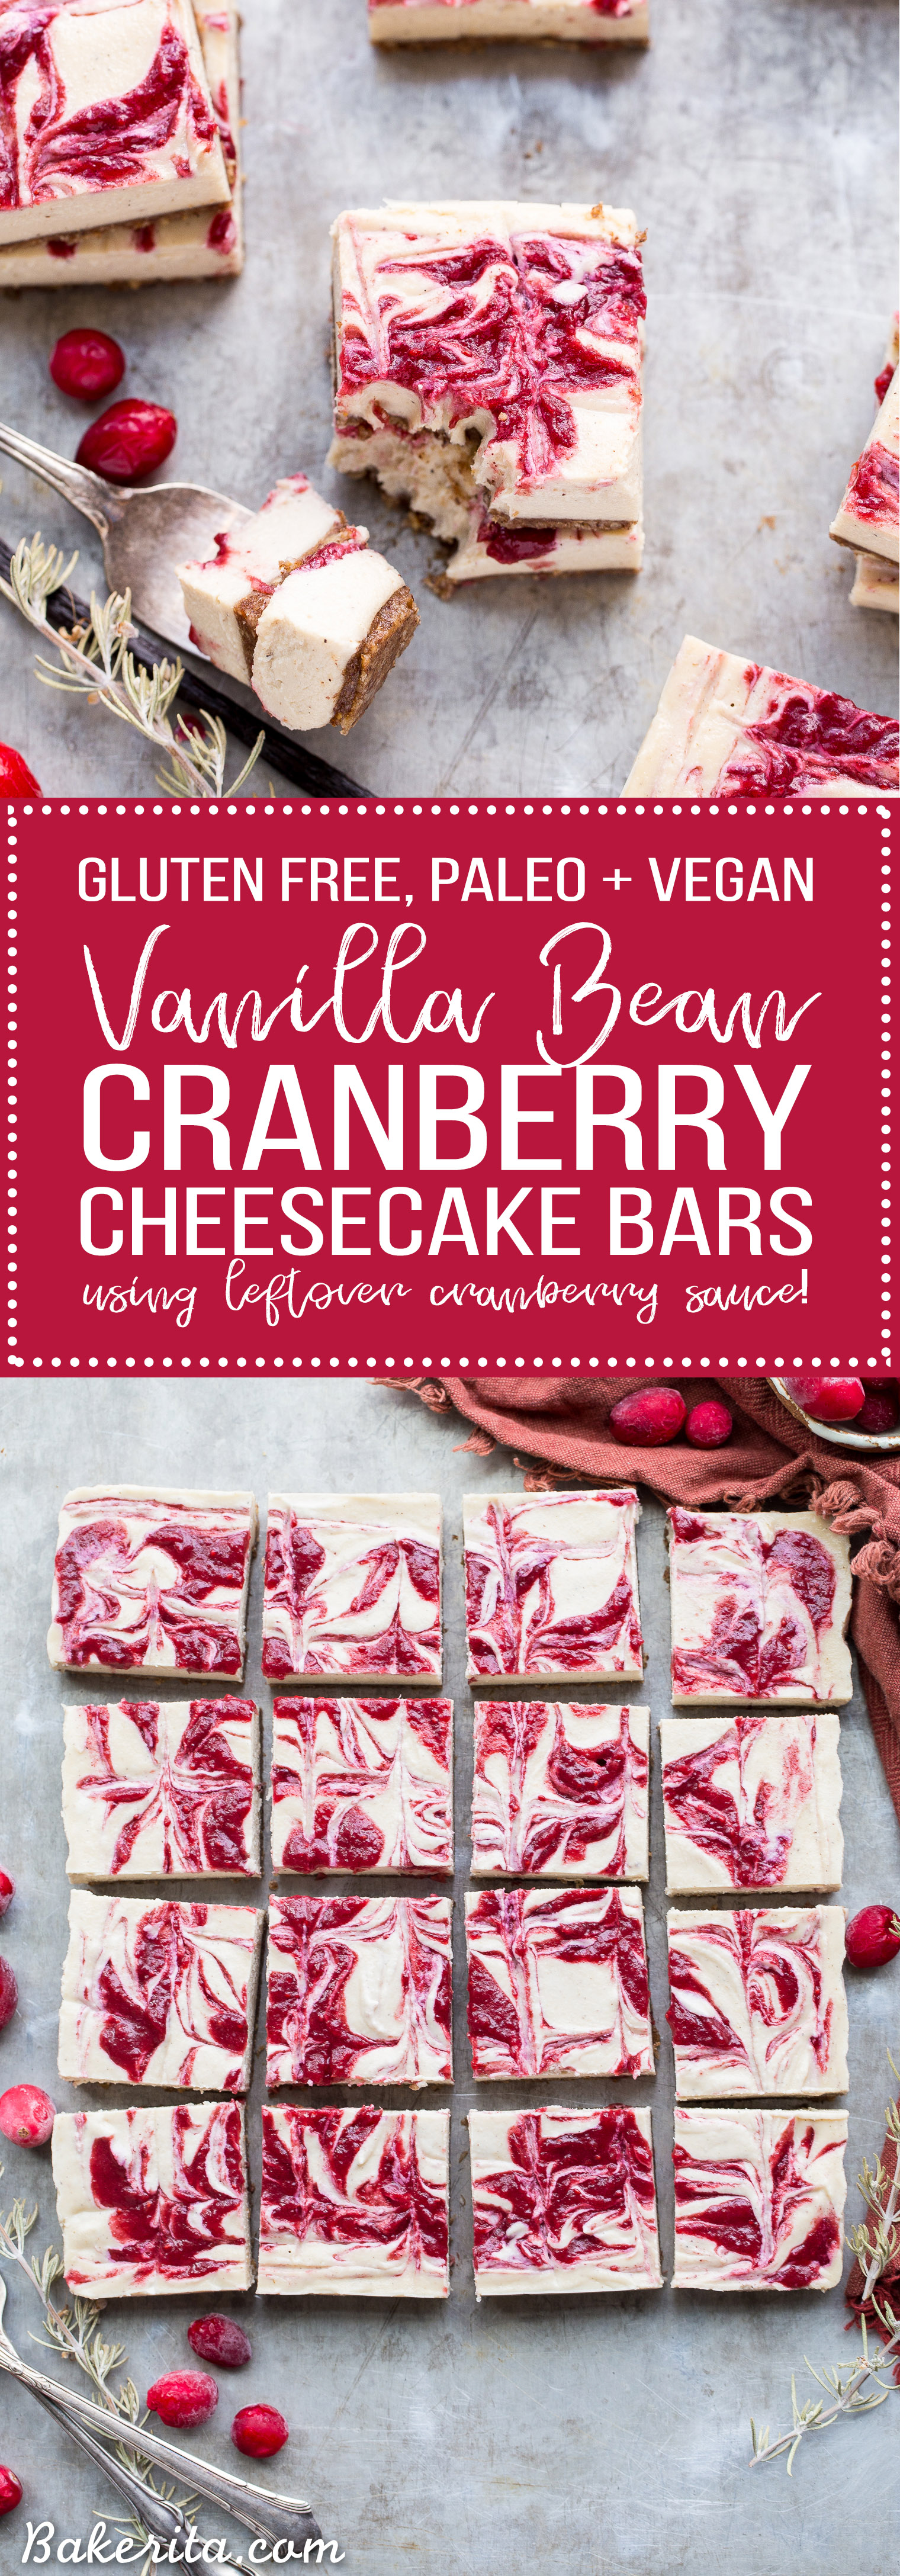 These No-Bake Vanilla Bean Cranberry Swirl Bars are made with cashews for a smooth and creamy 